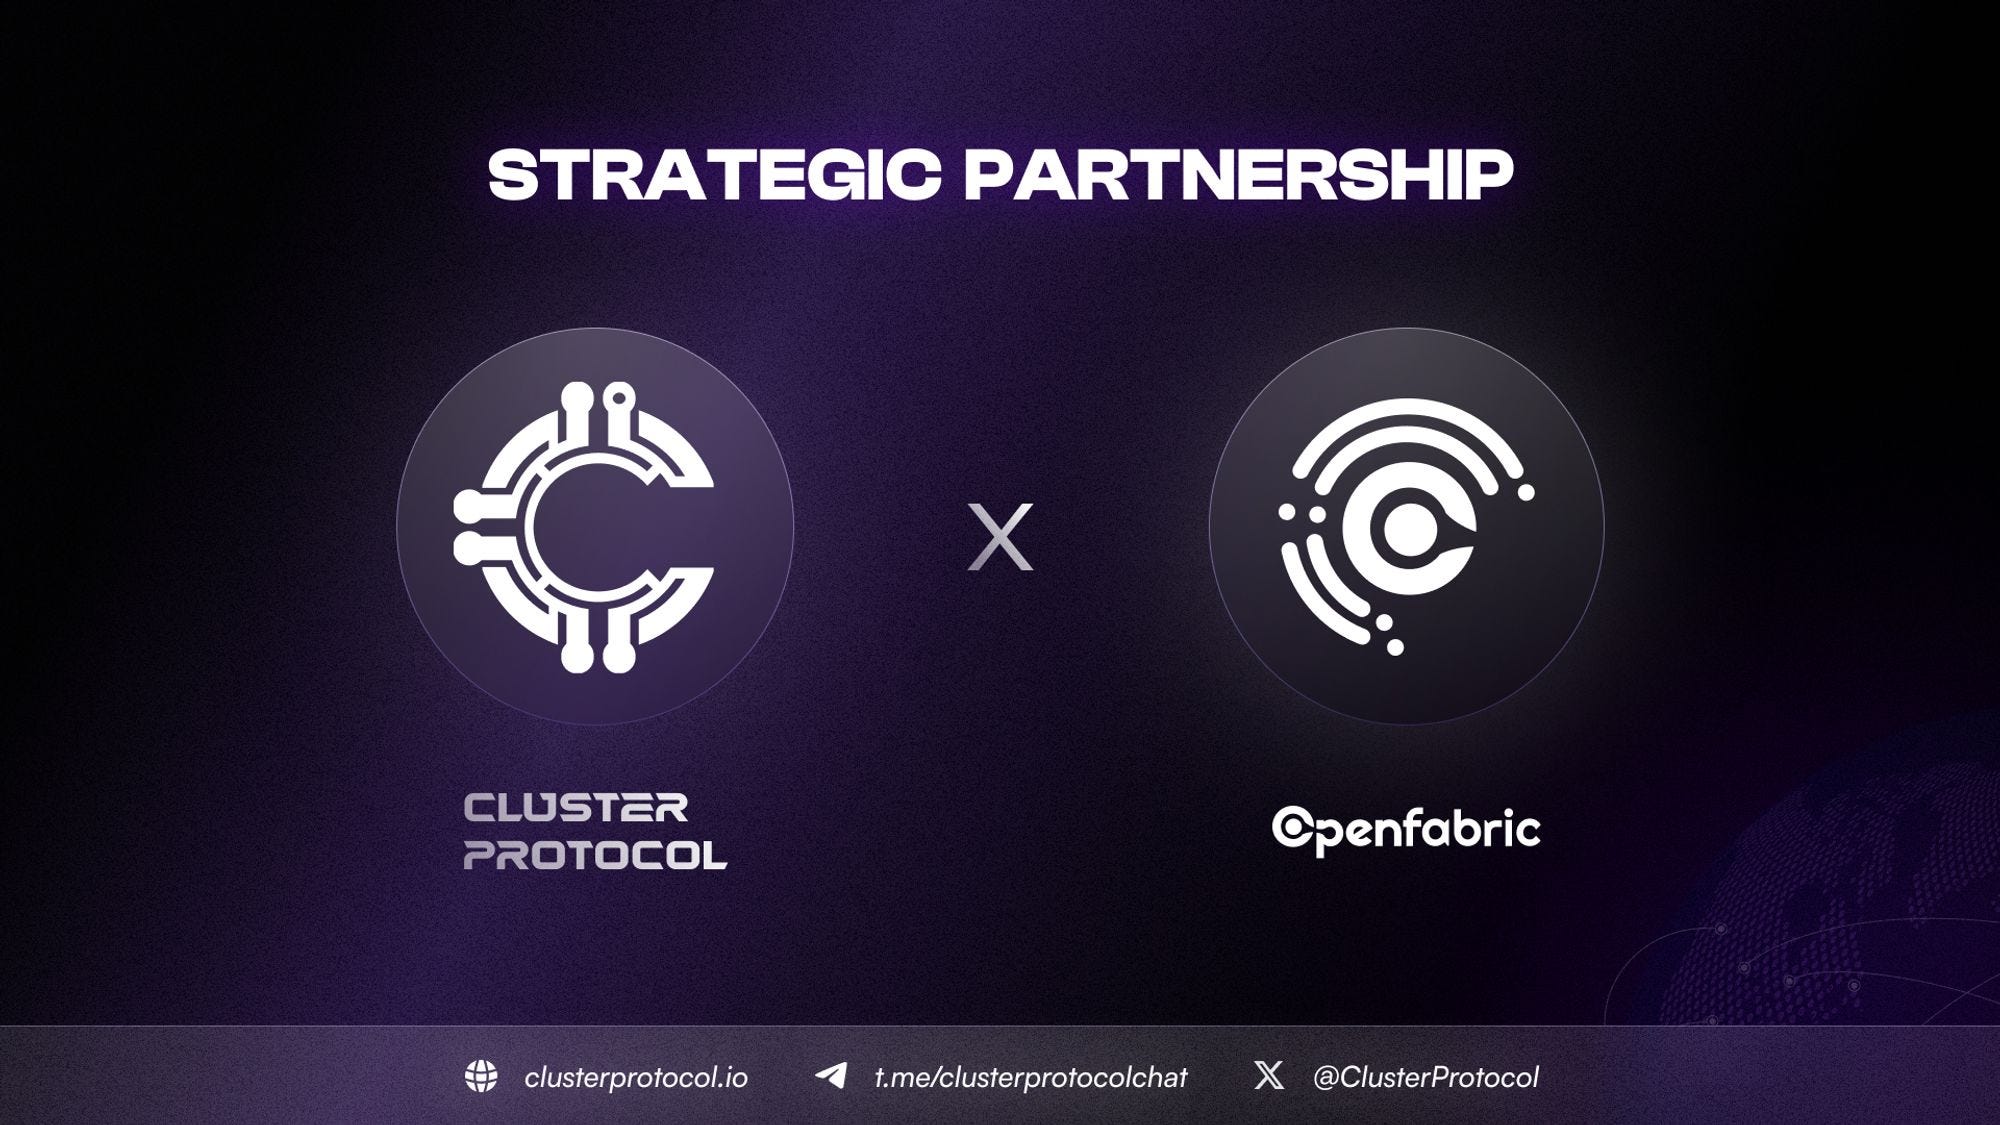 Cluster Protocol announces its strategic partnership with Openfabric AI